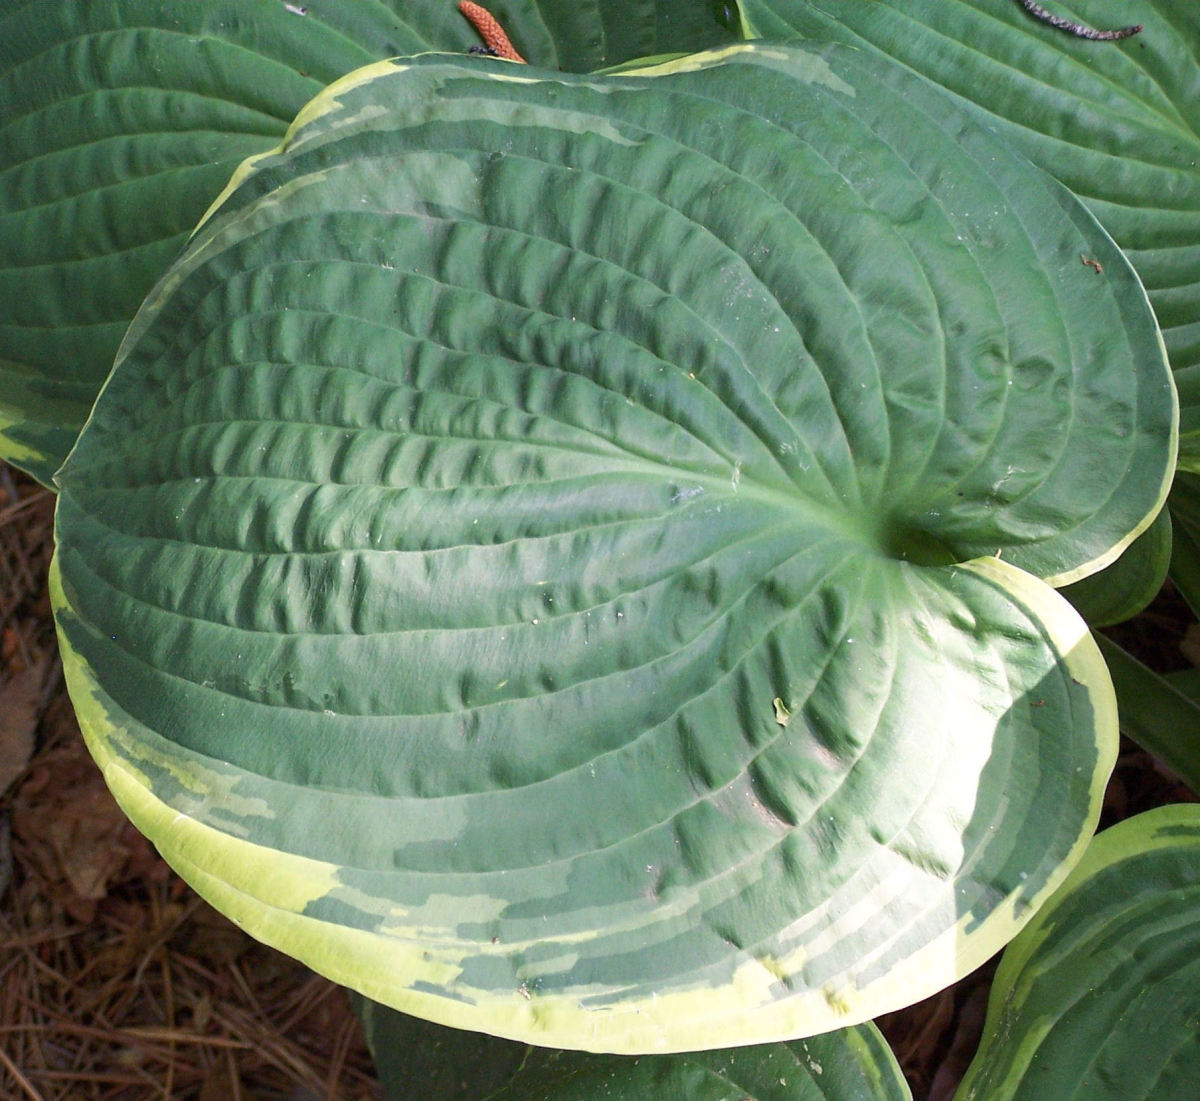 This is a leaf of "Frances Williams". Frances has the corrugated leaves that add more interest to many hostas.